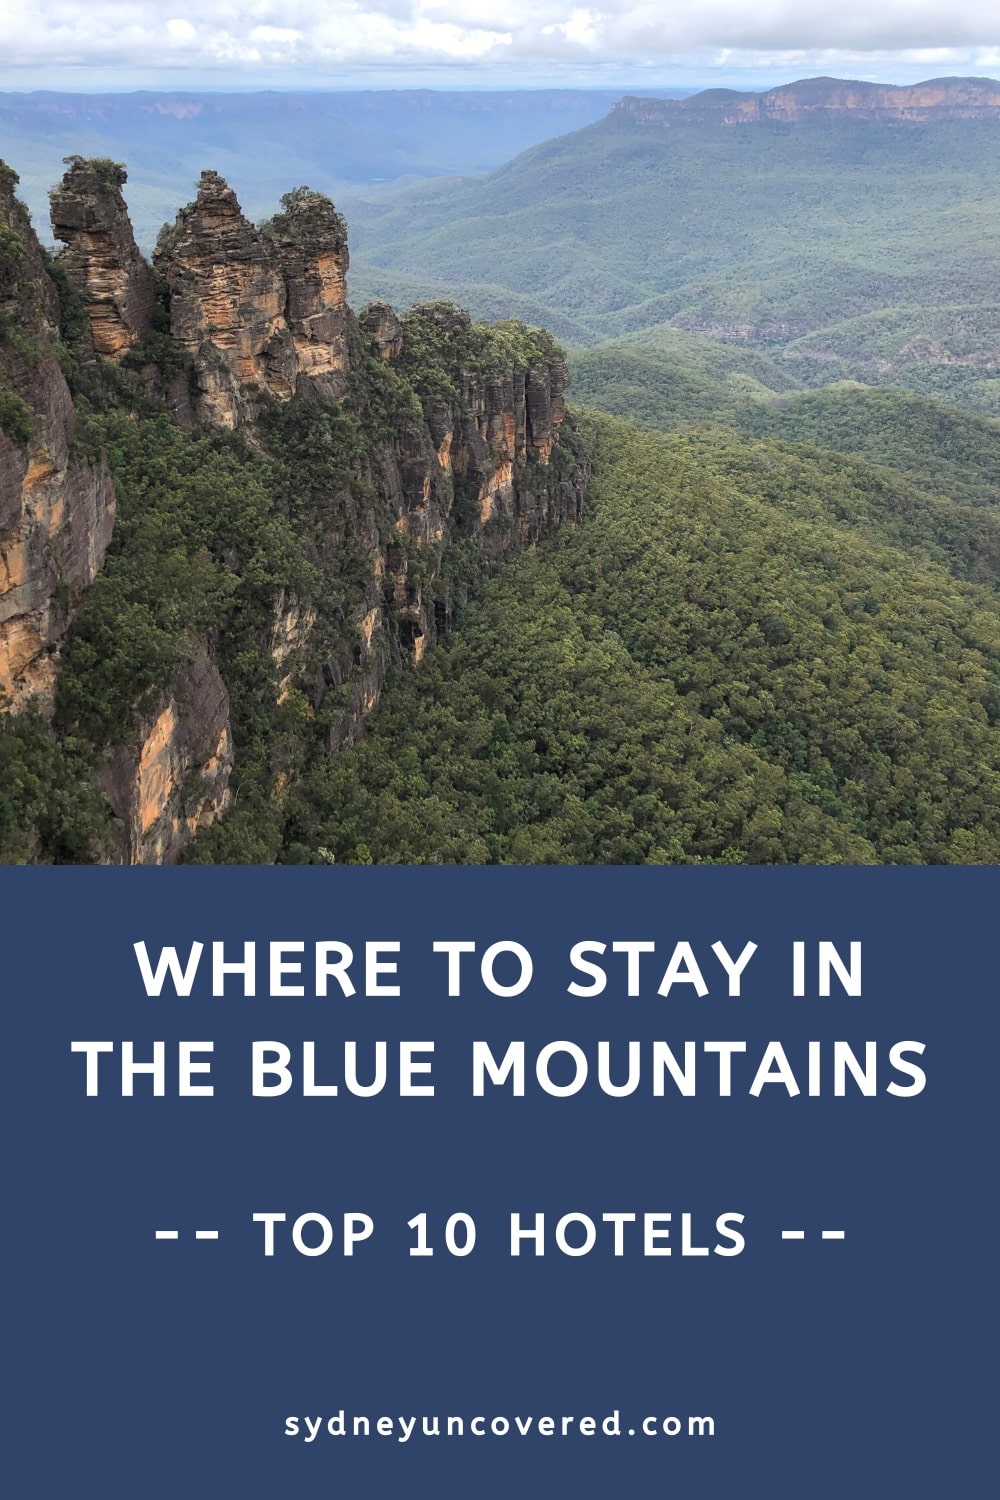 Where to stay in the Blue Mountains (best hotels)